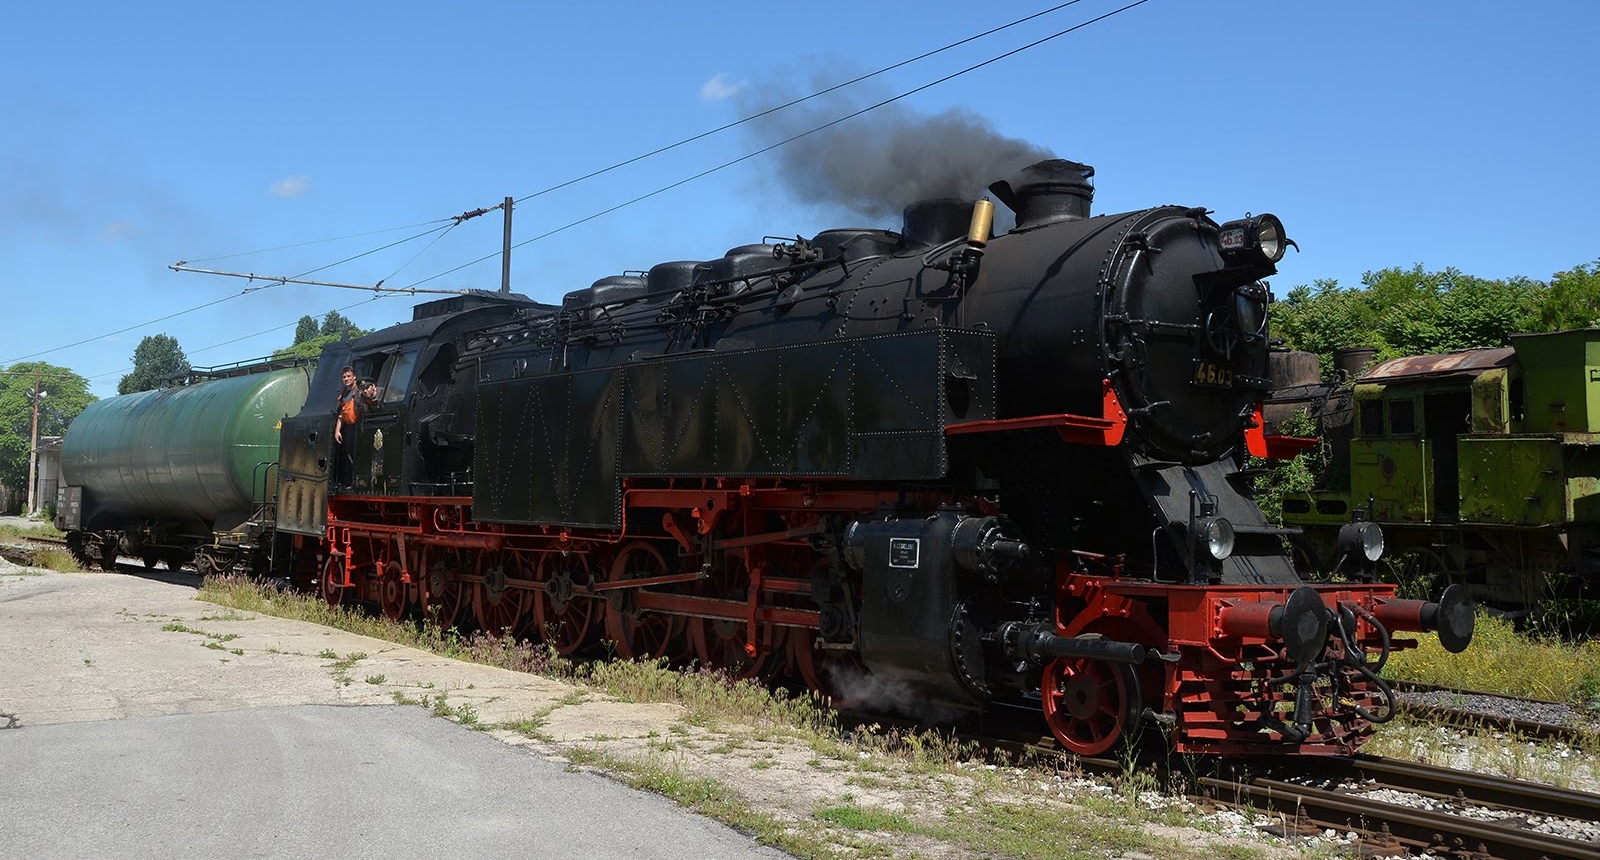 BDZ 46.03 in May 2015